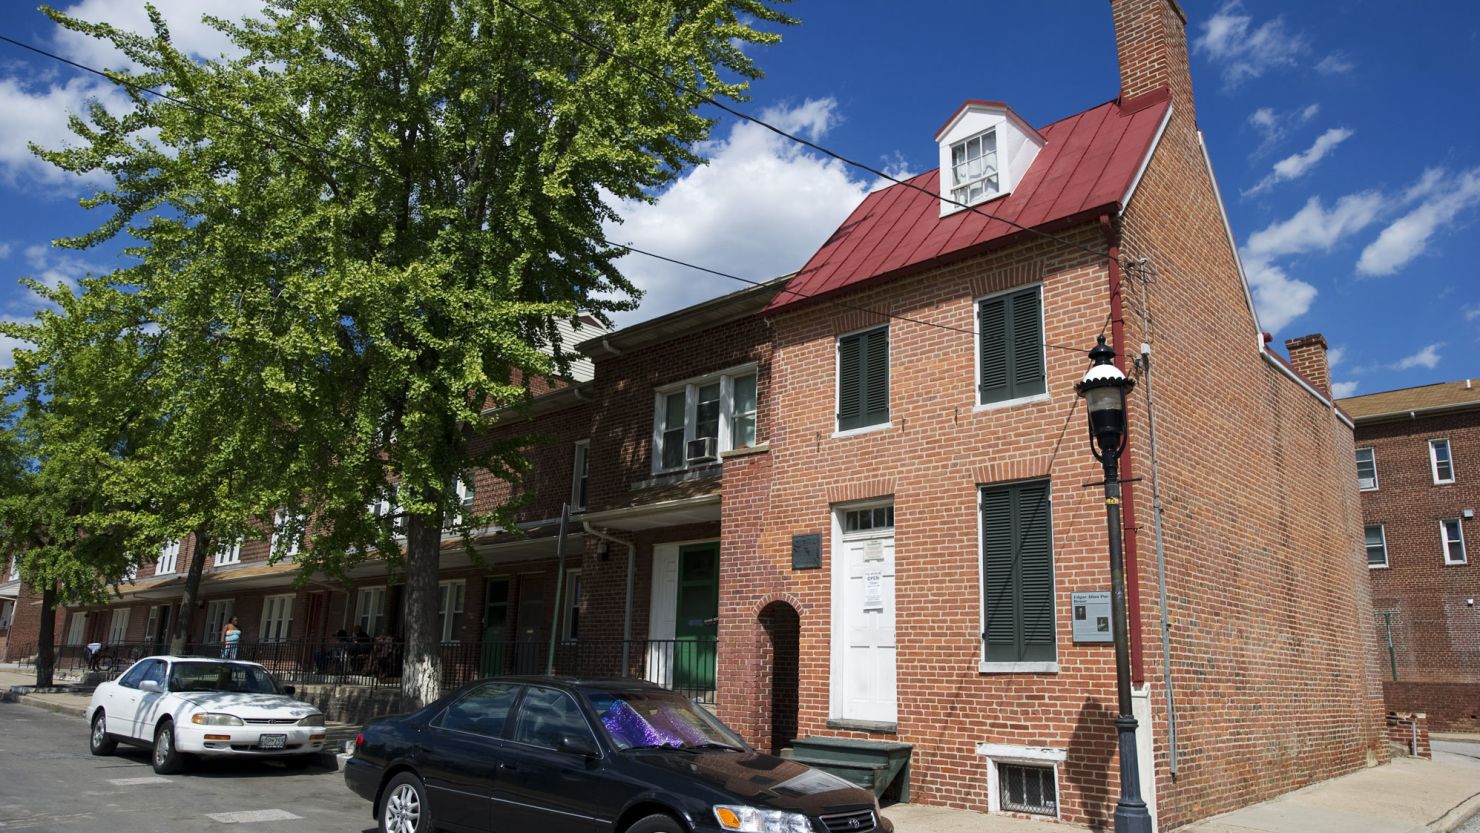 This unassuming, red-brick home in Baltimore once housed Edgar Allan Poe in the 1830s. Now a museum and recently ordained Literary Landmark, it houses thousands of visitors every year who honor his macabre legacy. 